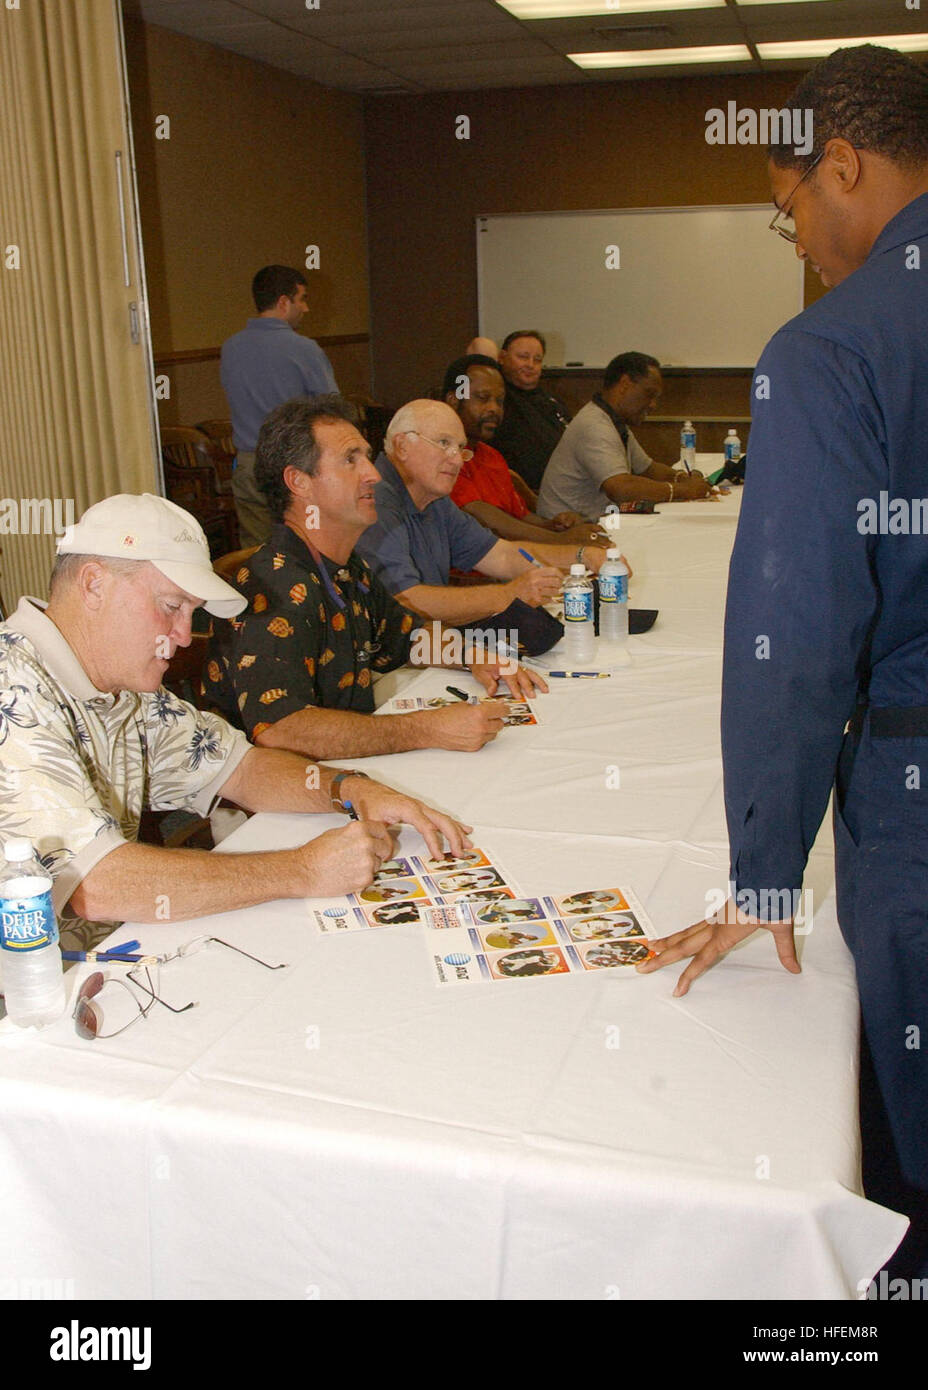 030626-N-3692H-515 Naval Station Norfolk, Va. (Jun. 26, 2003) -- Retired professional Major League Baseball players: Graig Nettles, Fred Lynn, Harmon Killebrew, Al Oliver, and Paul Blair sign autographs for Navy personnel at Aircraft Intermediate Maintenance Department (AIMD) Norfolk. The group of retired professional Major Leaguers are touring Military bases to show their appreciation to the troops.  U.S. Navy photo by PhotographerÕs Mate 3rd Class Stacey Hines.  (RELEASED) US Navy 030626-N-3692H-515 Retired professional Major League Baseball players, Graig Nettles, Fred Lynn, Harmon Killebre Stock Photo